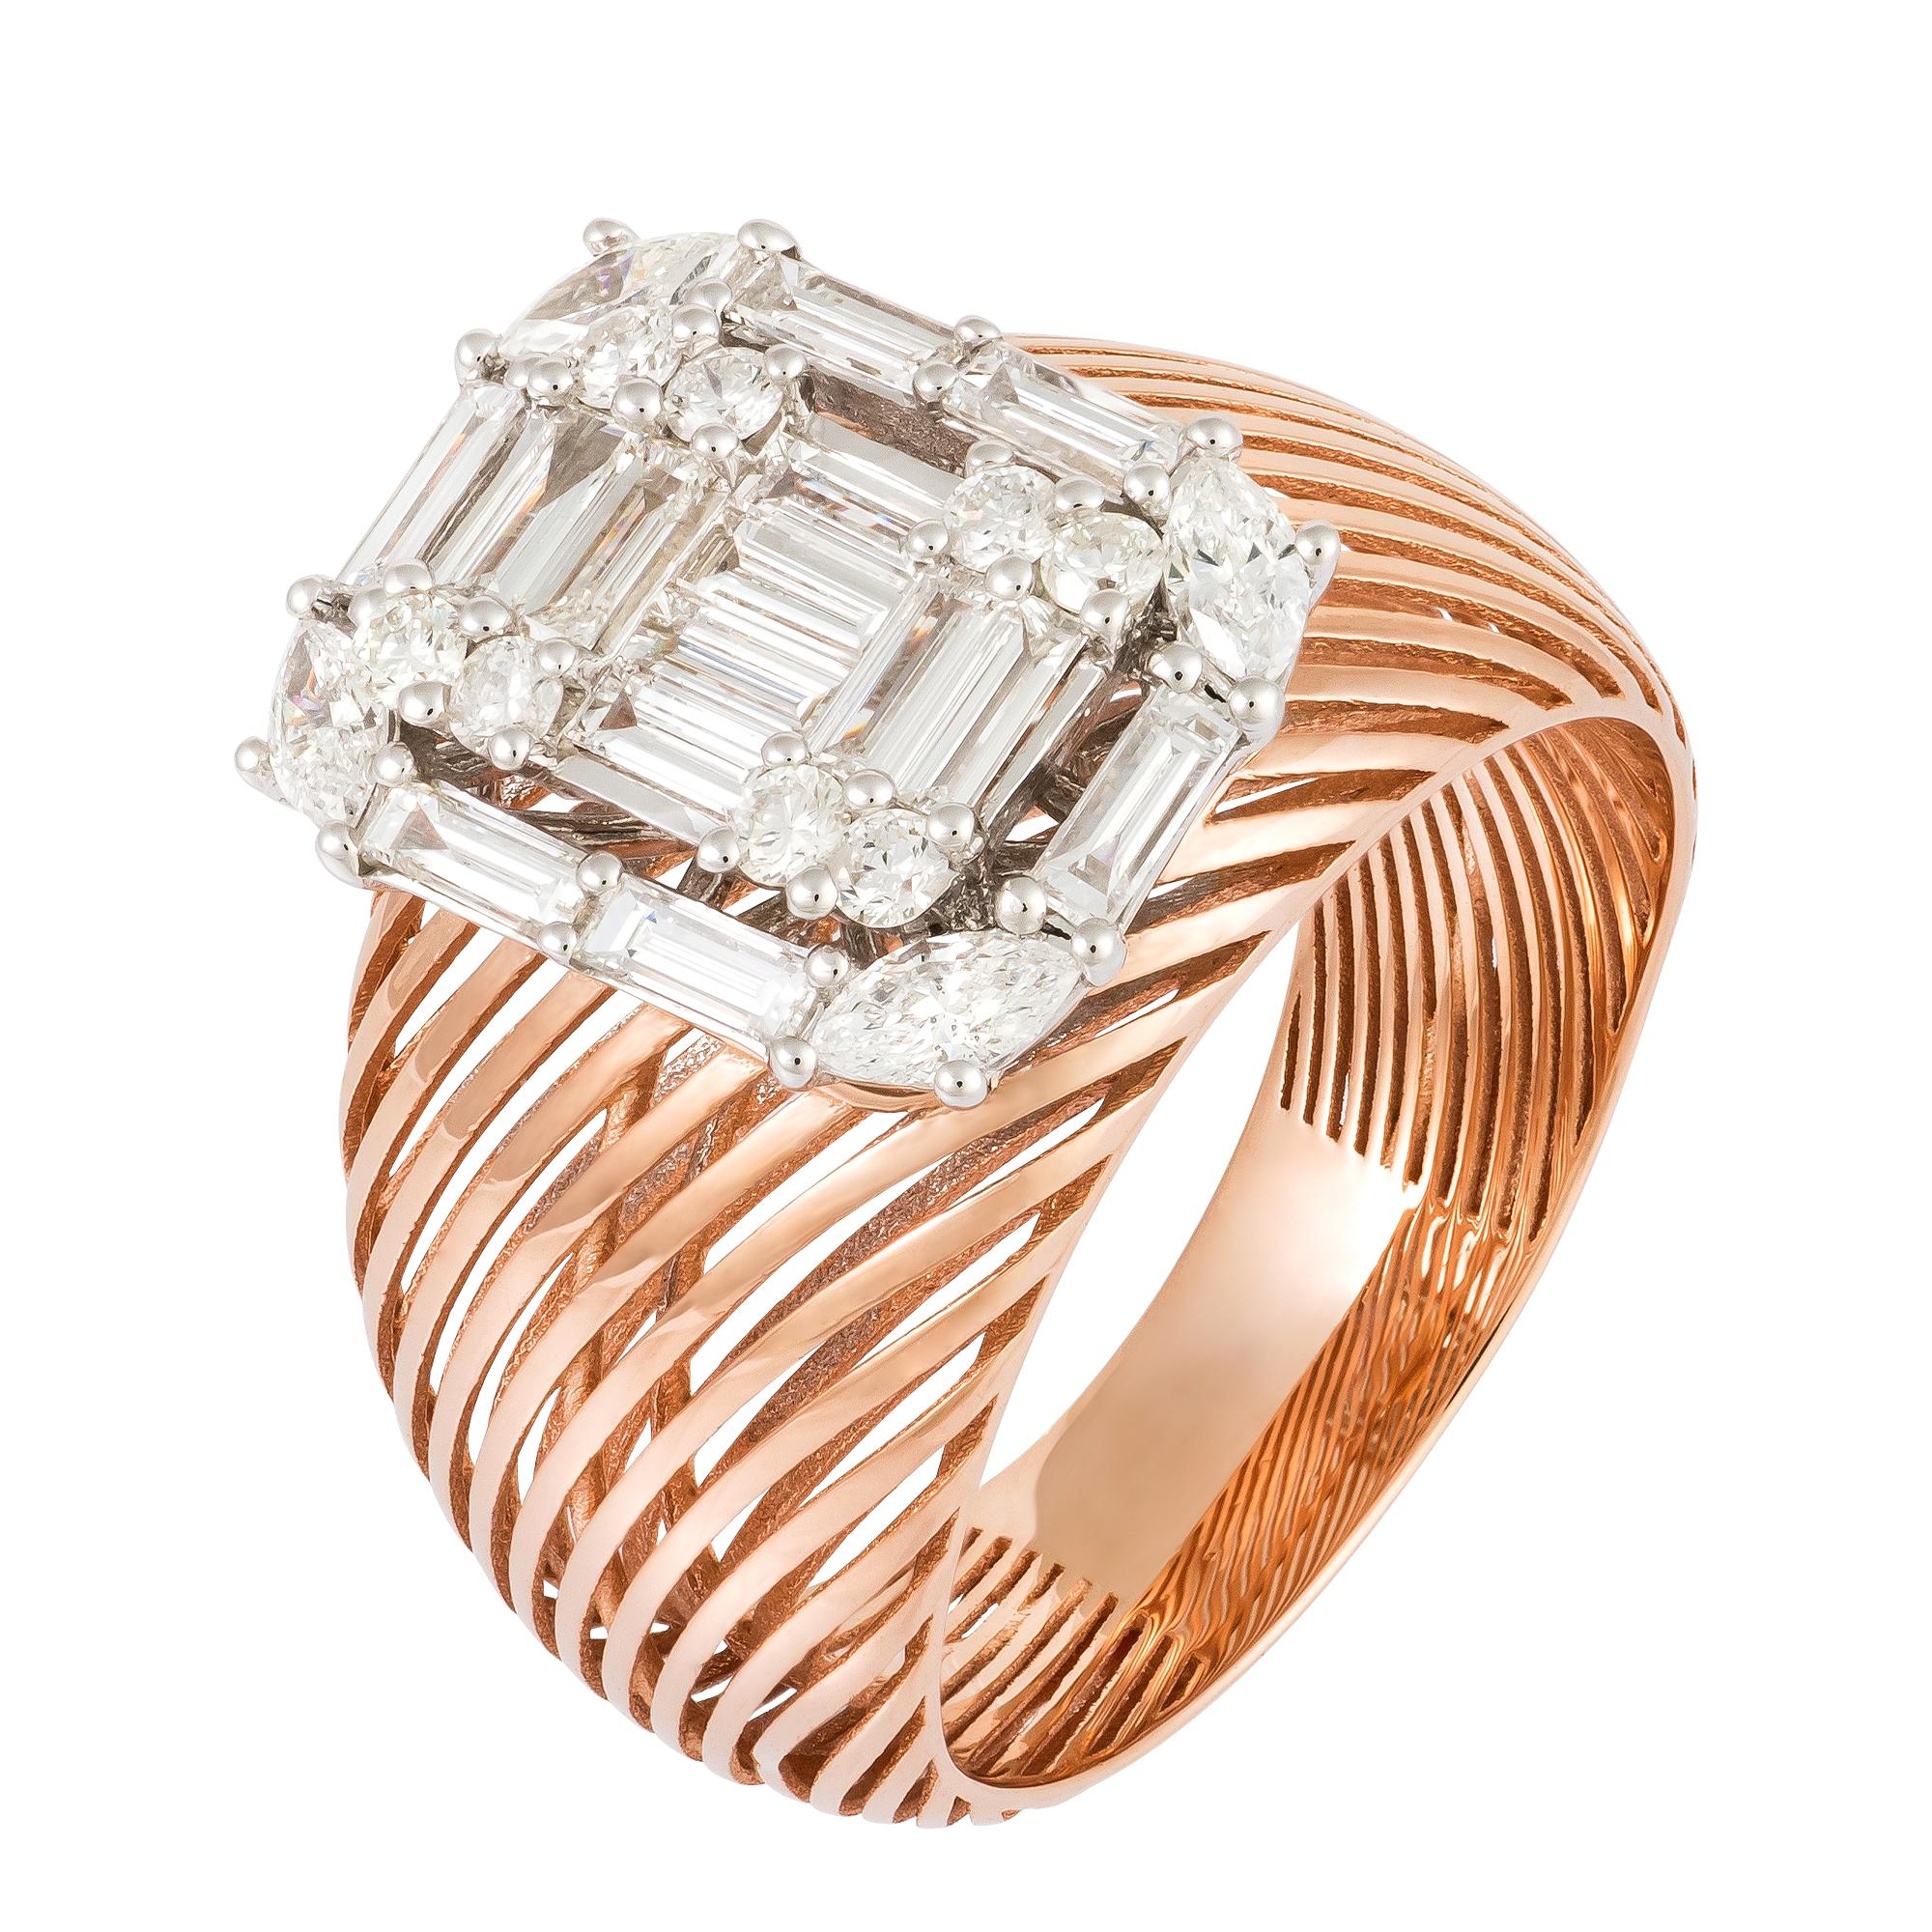 For Sale:  Evening White Pink 18K Gold White Diamond Ring For Her 4